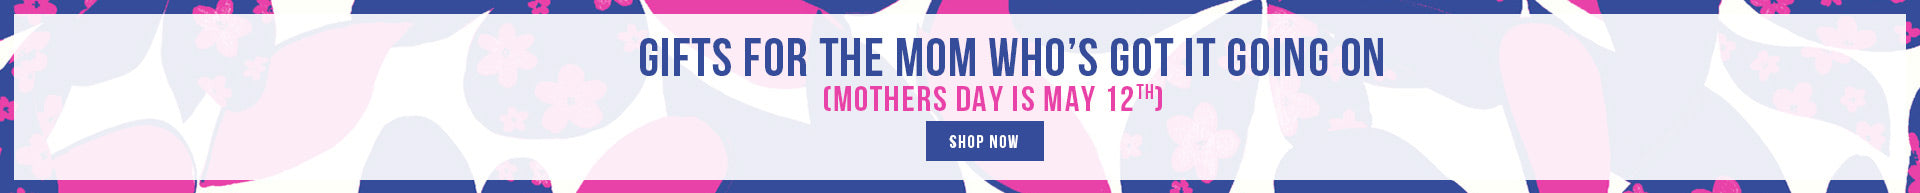 GIFTS FOR THE MOM WHO’S GOT IT GOING ON  | Shop Now